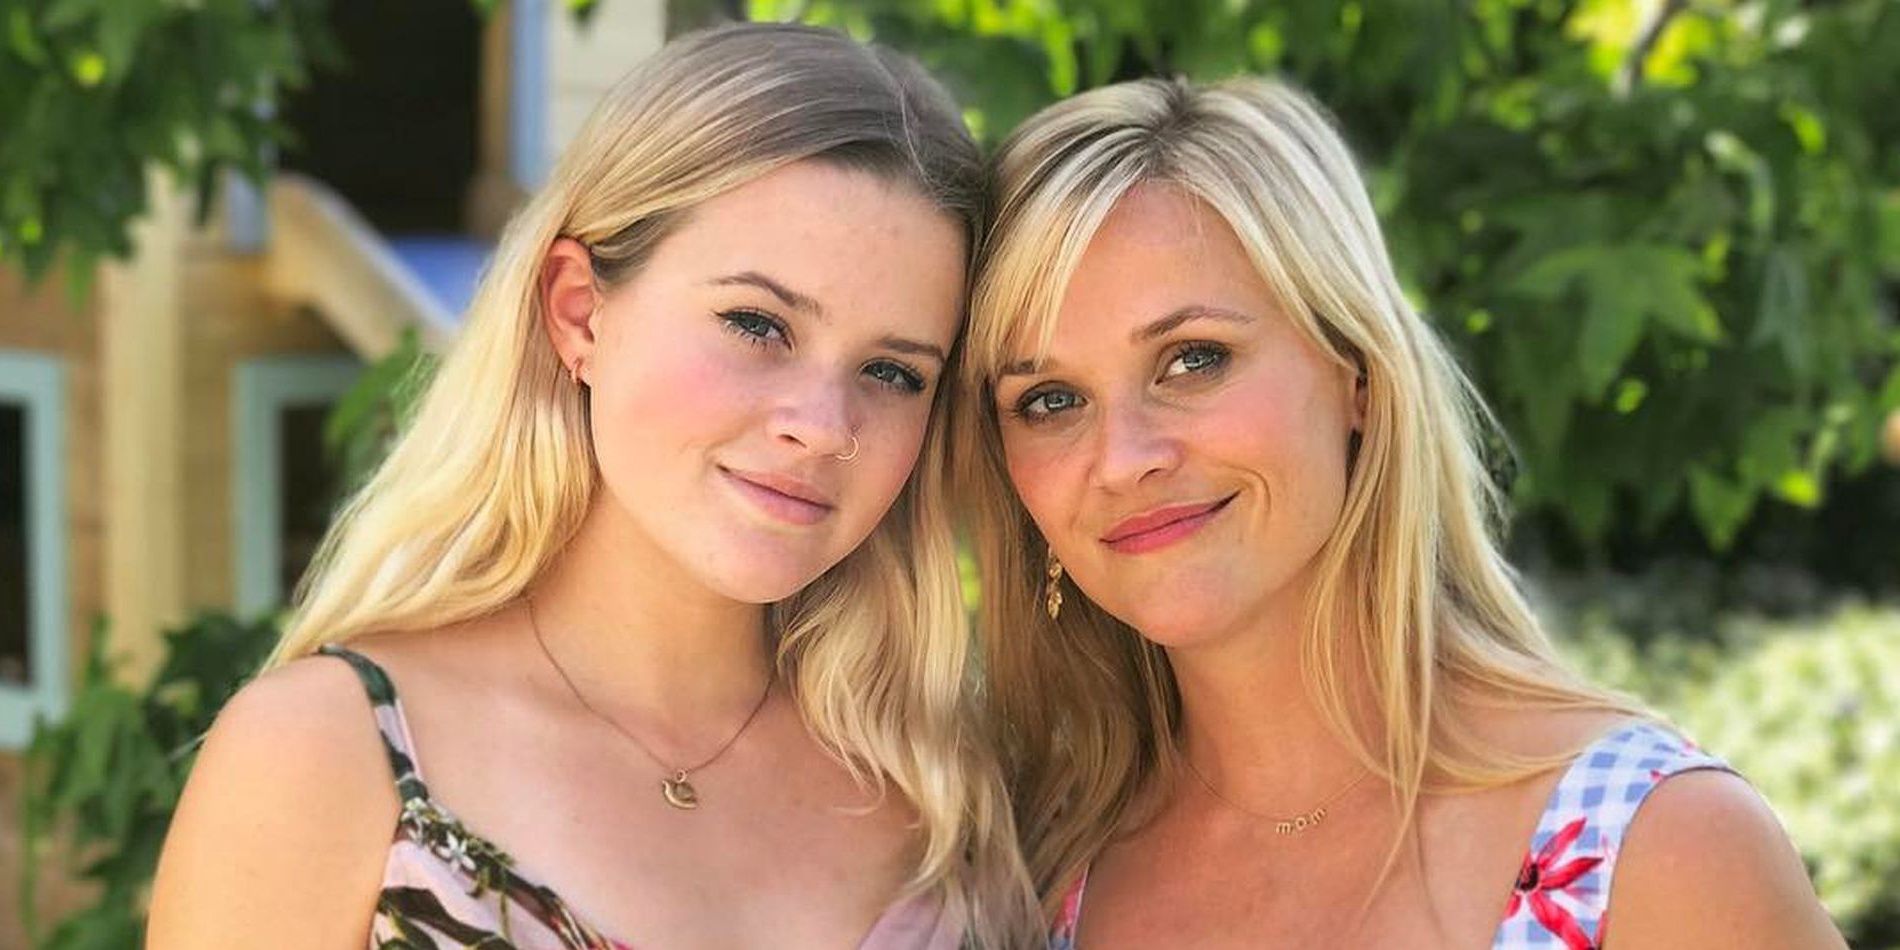 Ava Phillippe & Reese Witherspoon.jpg